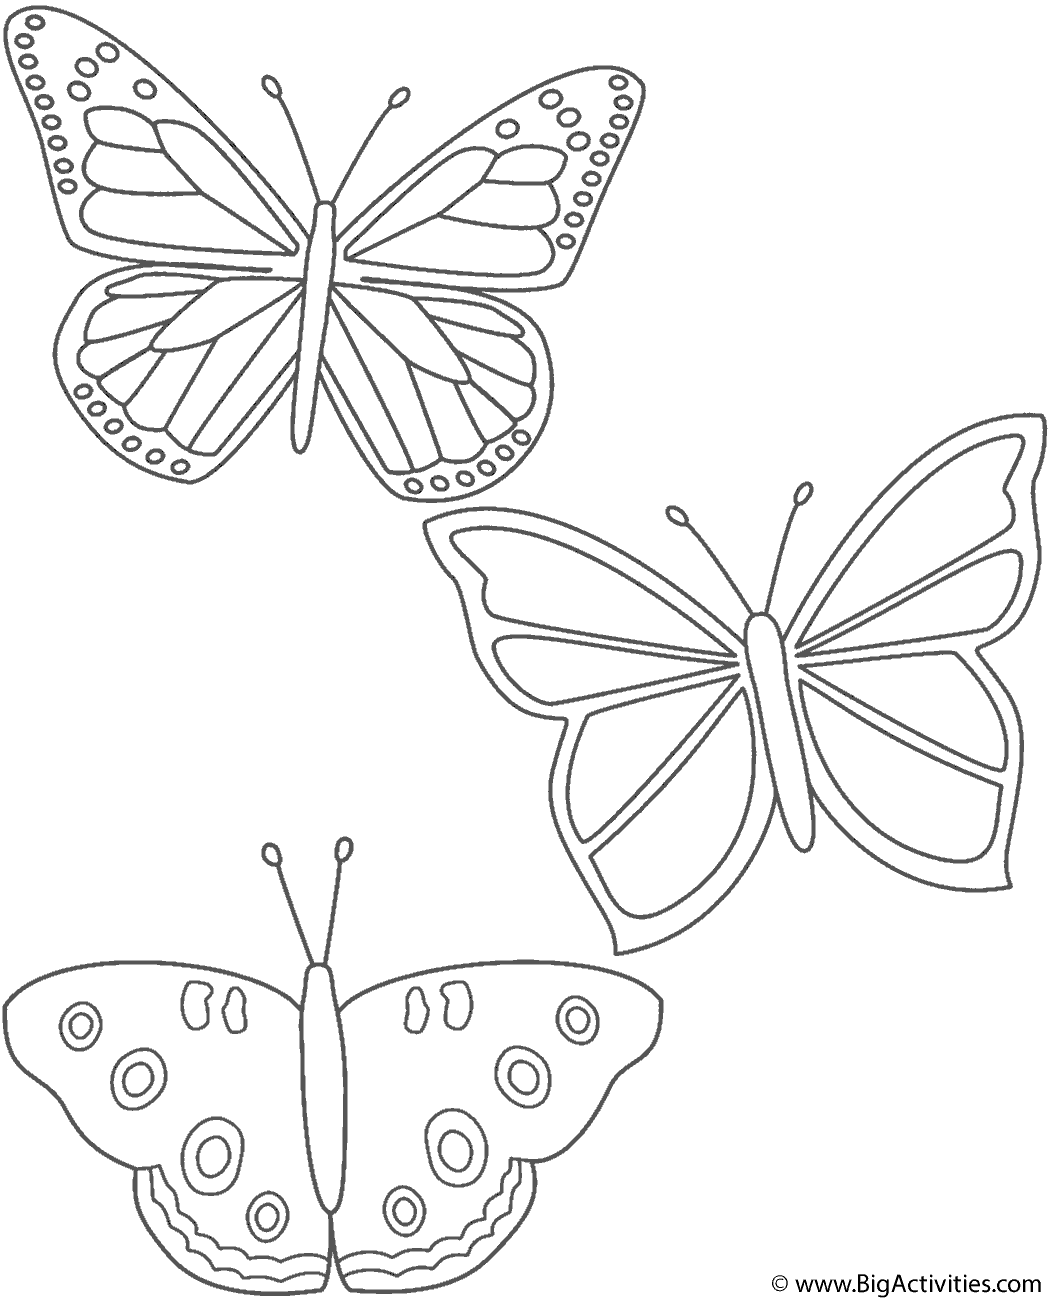 Download Three Butterflies - Coloring Page (Insects)